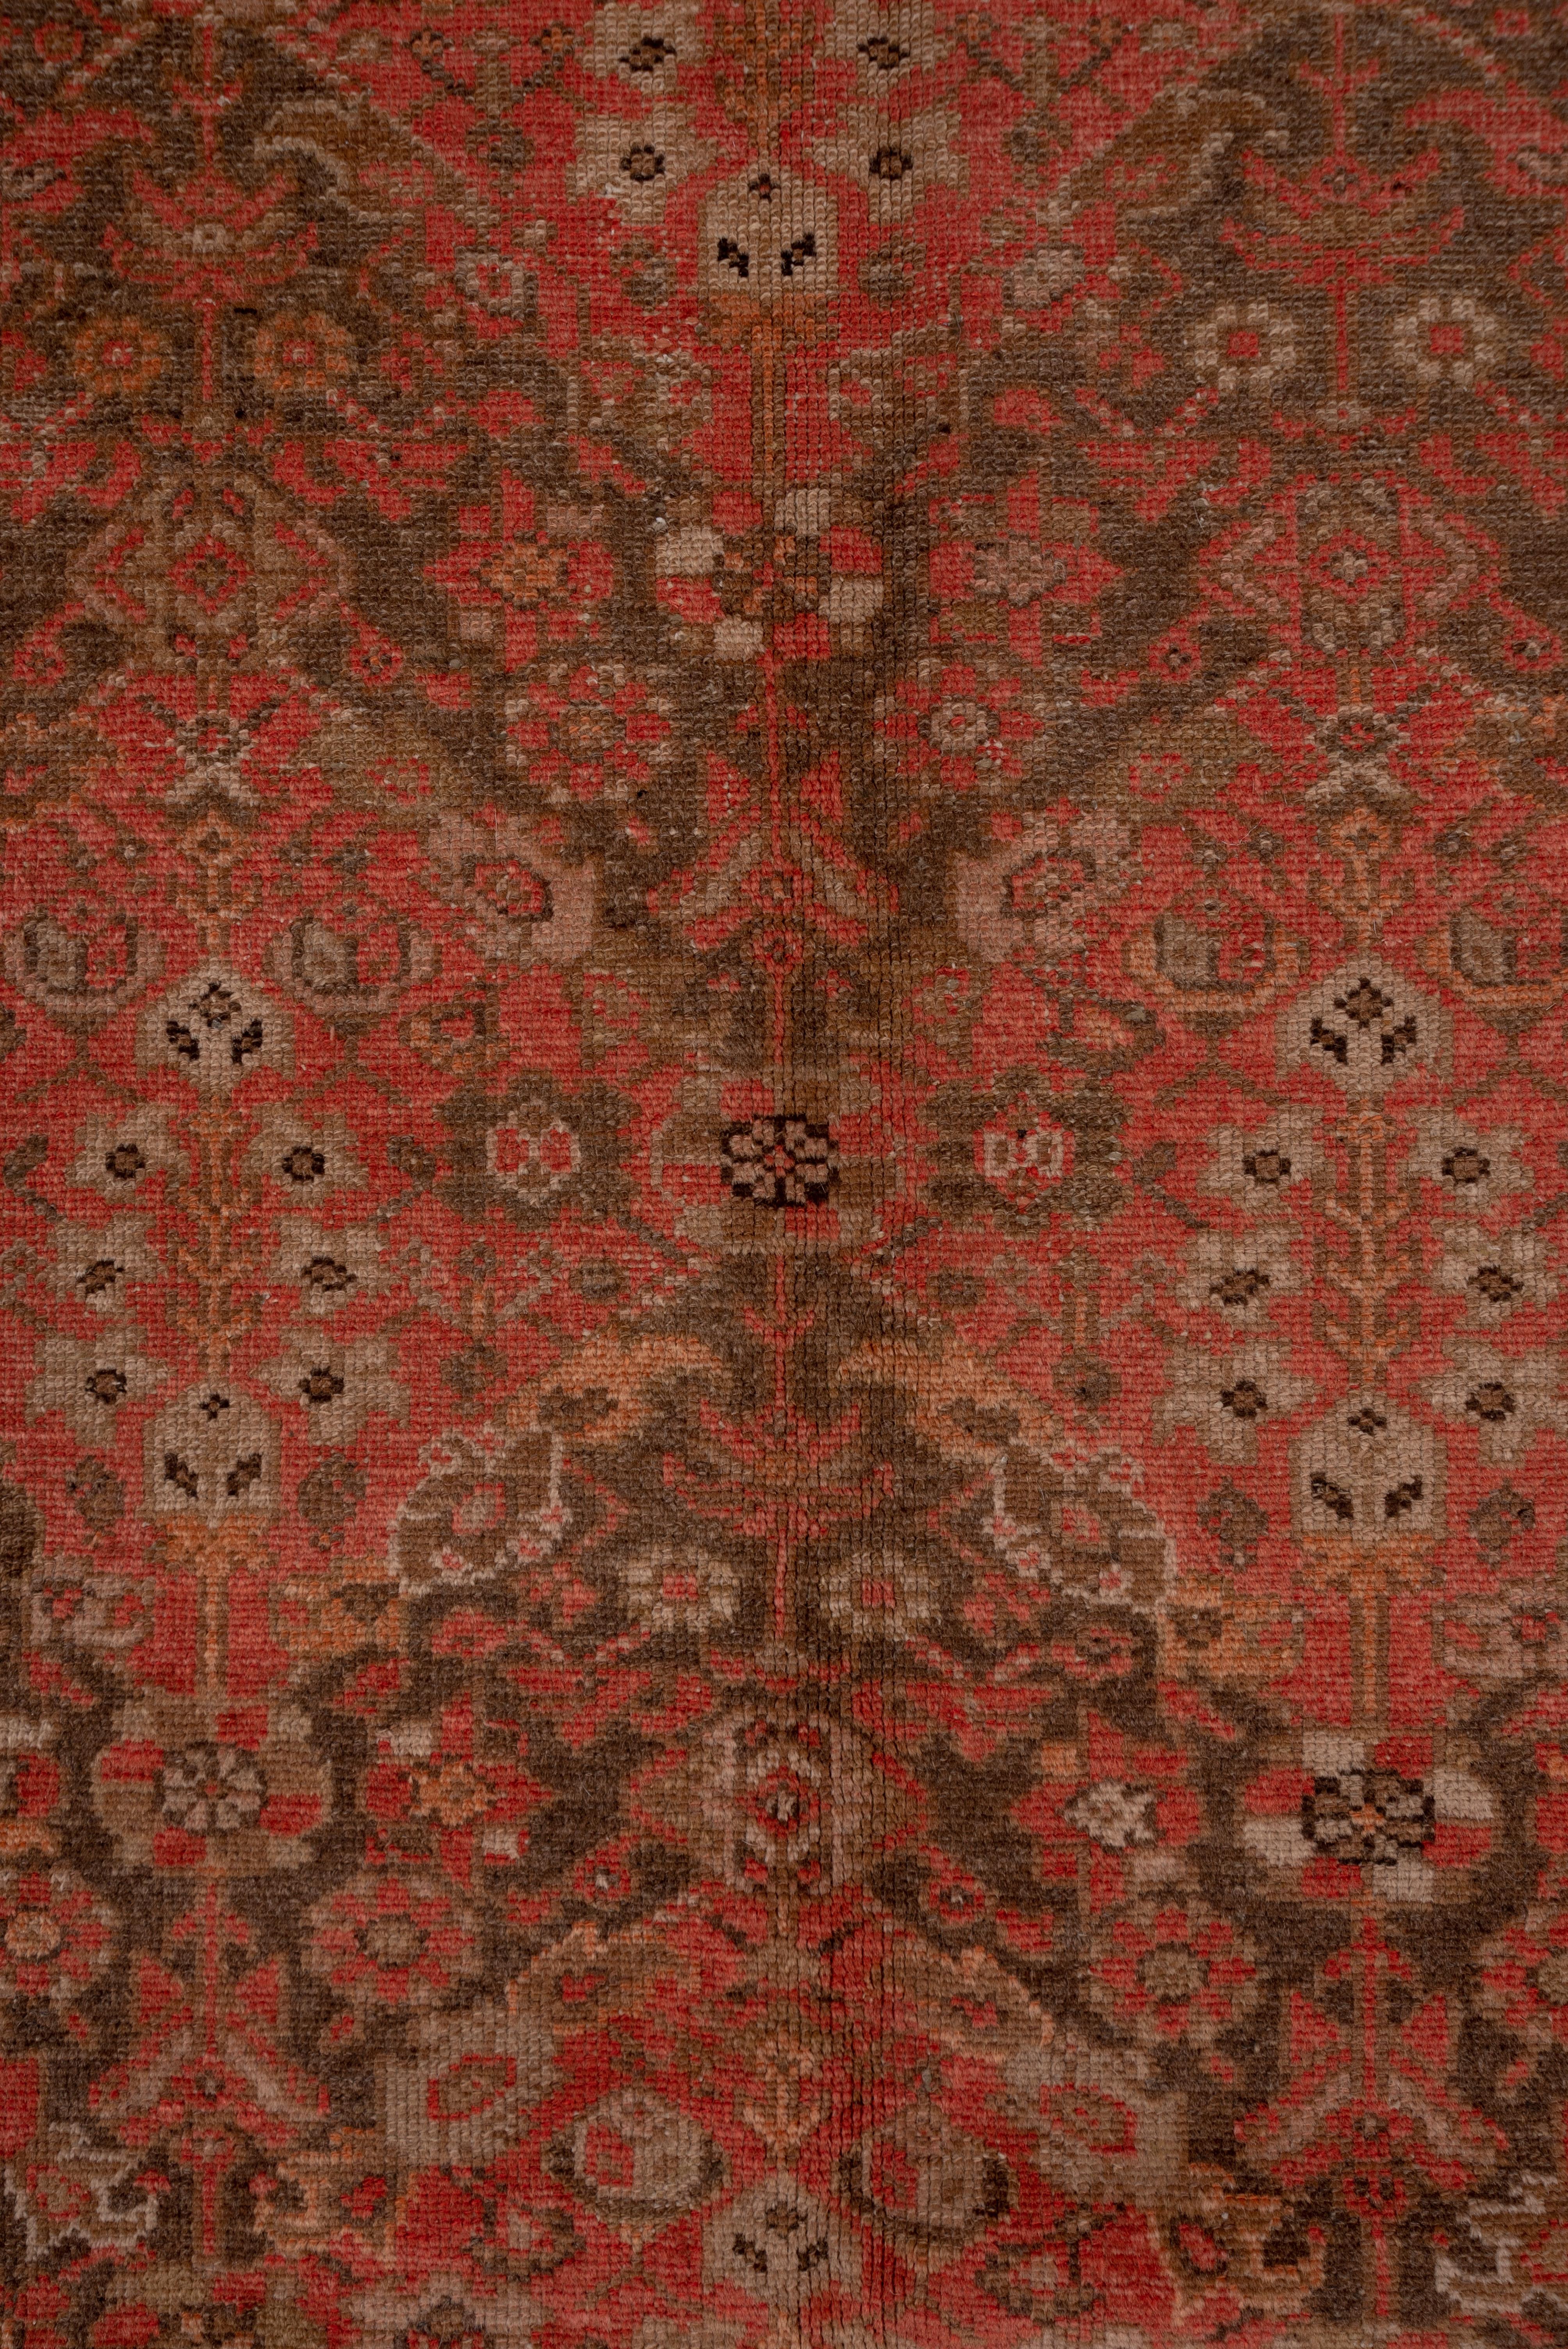 Antique Persian Malayer Gallery Rug, Red and Brown Field, Coral Tones In Good Condition For Sale In New York, NY